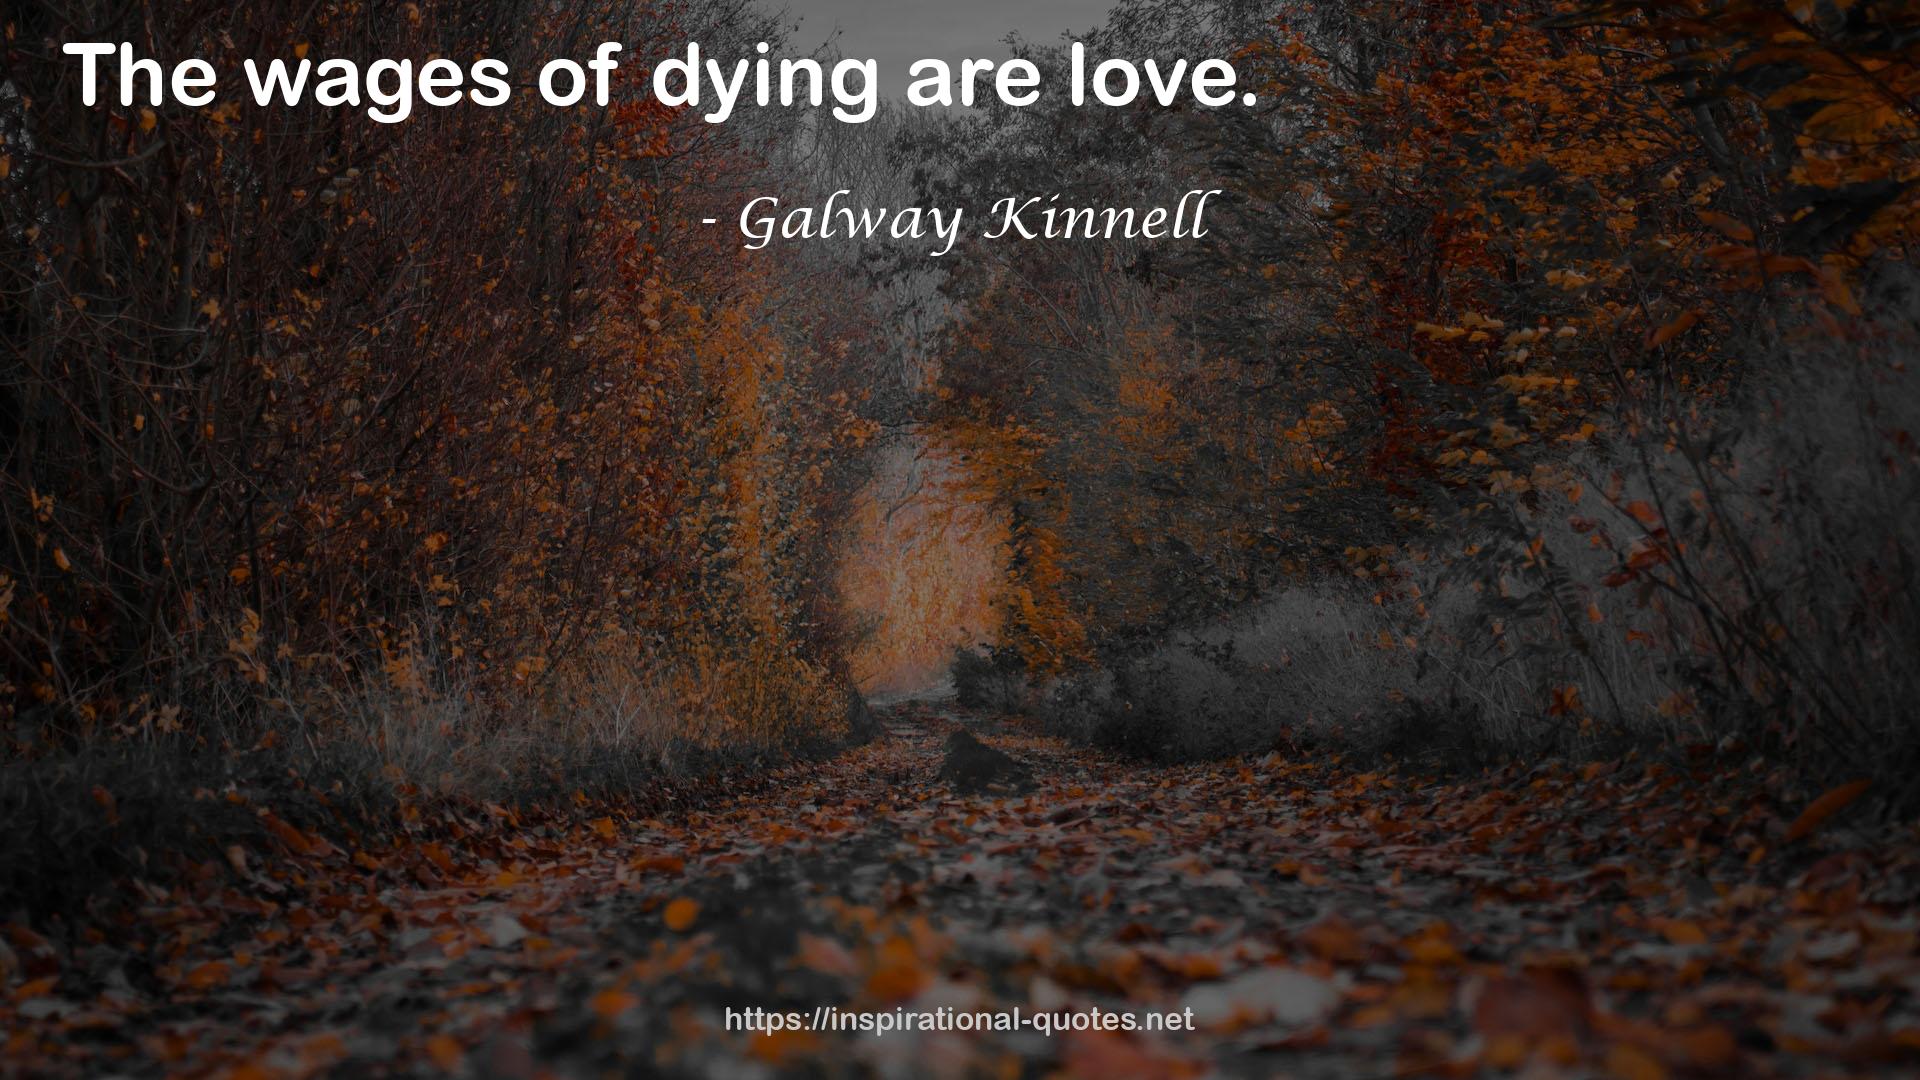 Galway Kinnell QUOTES